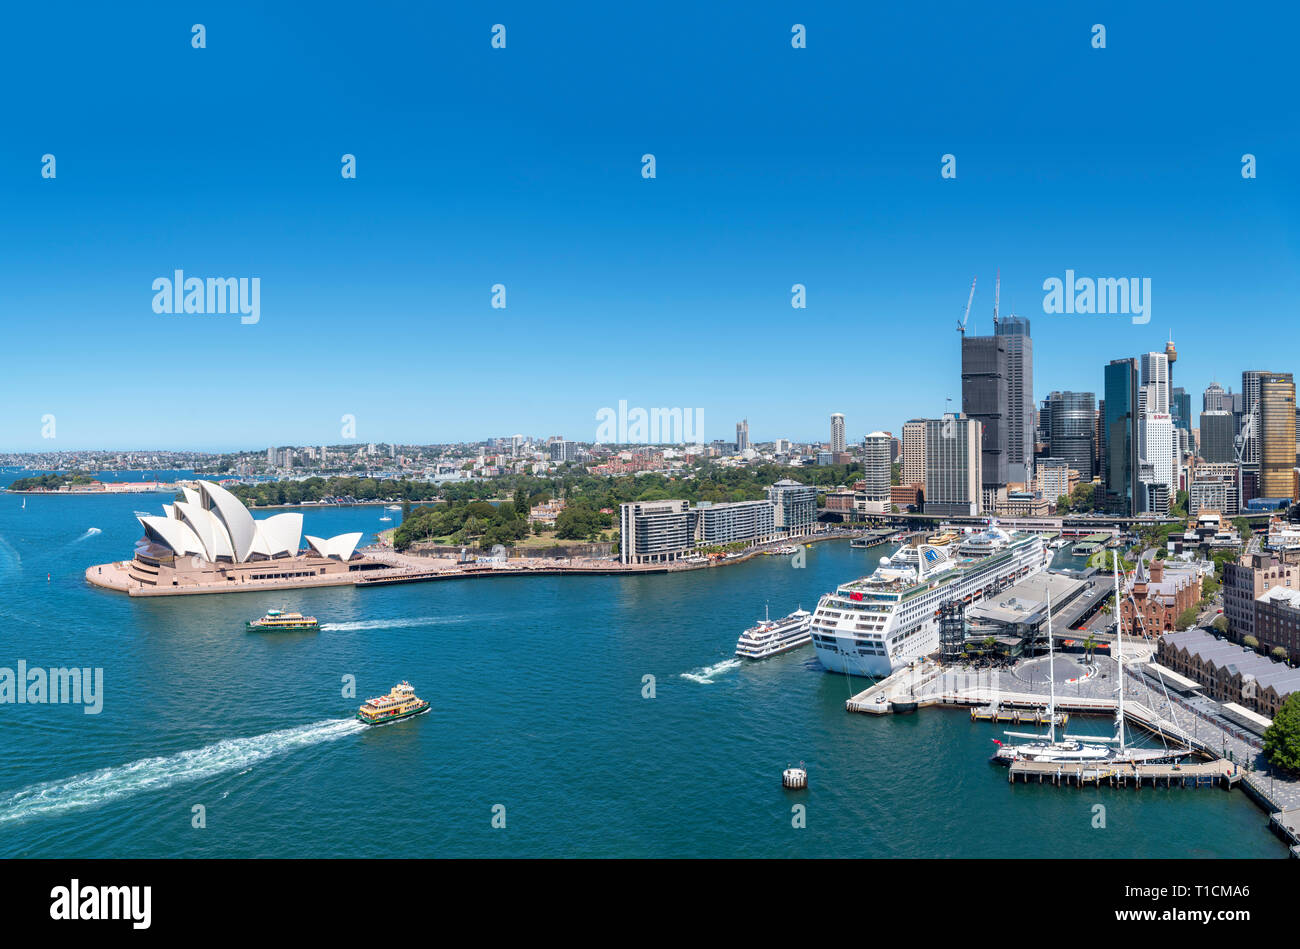 Sydney Opera House, Circular Quay and the Central Business District (CBD) viewed from Sydney Harbour Bridge, Sydney, Australia Stock Photo